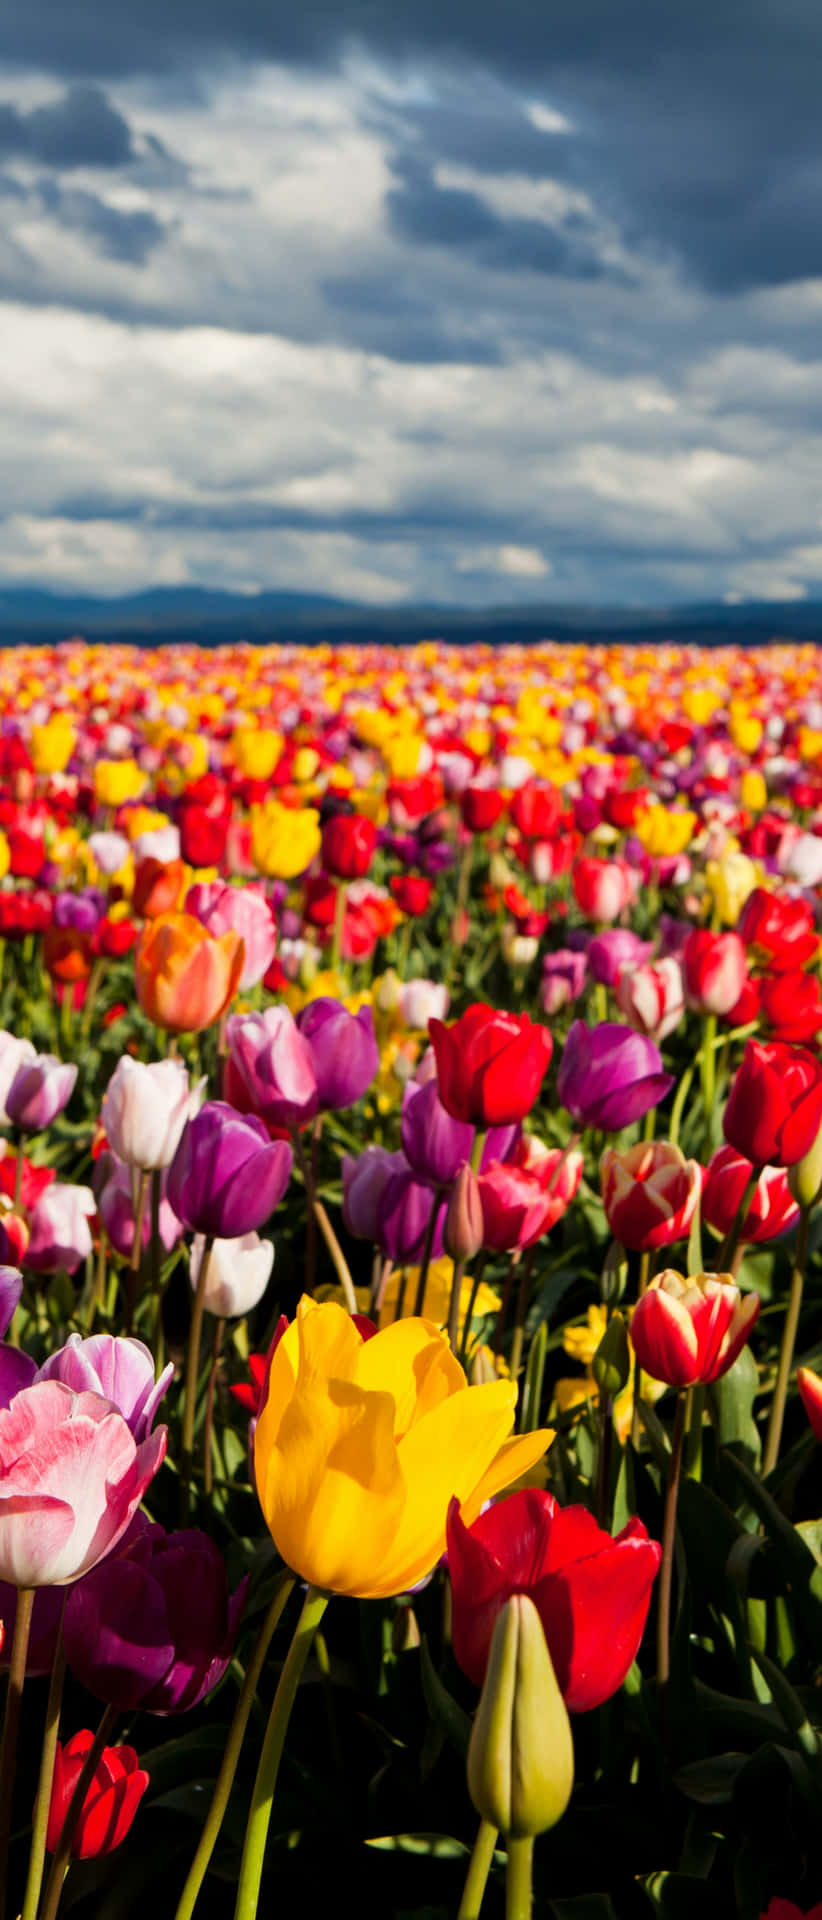 A Stunning View of Vibrant Tulip Field Wallpaper